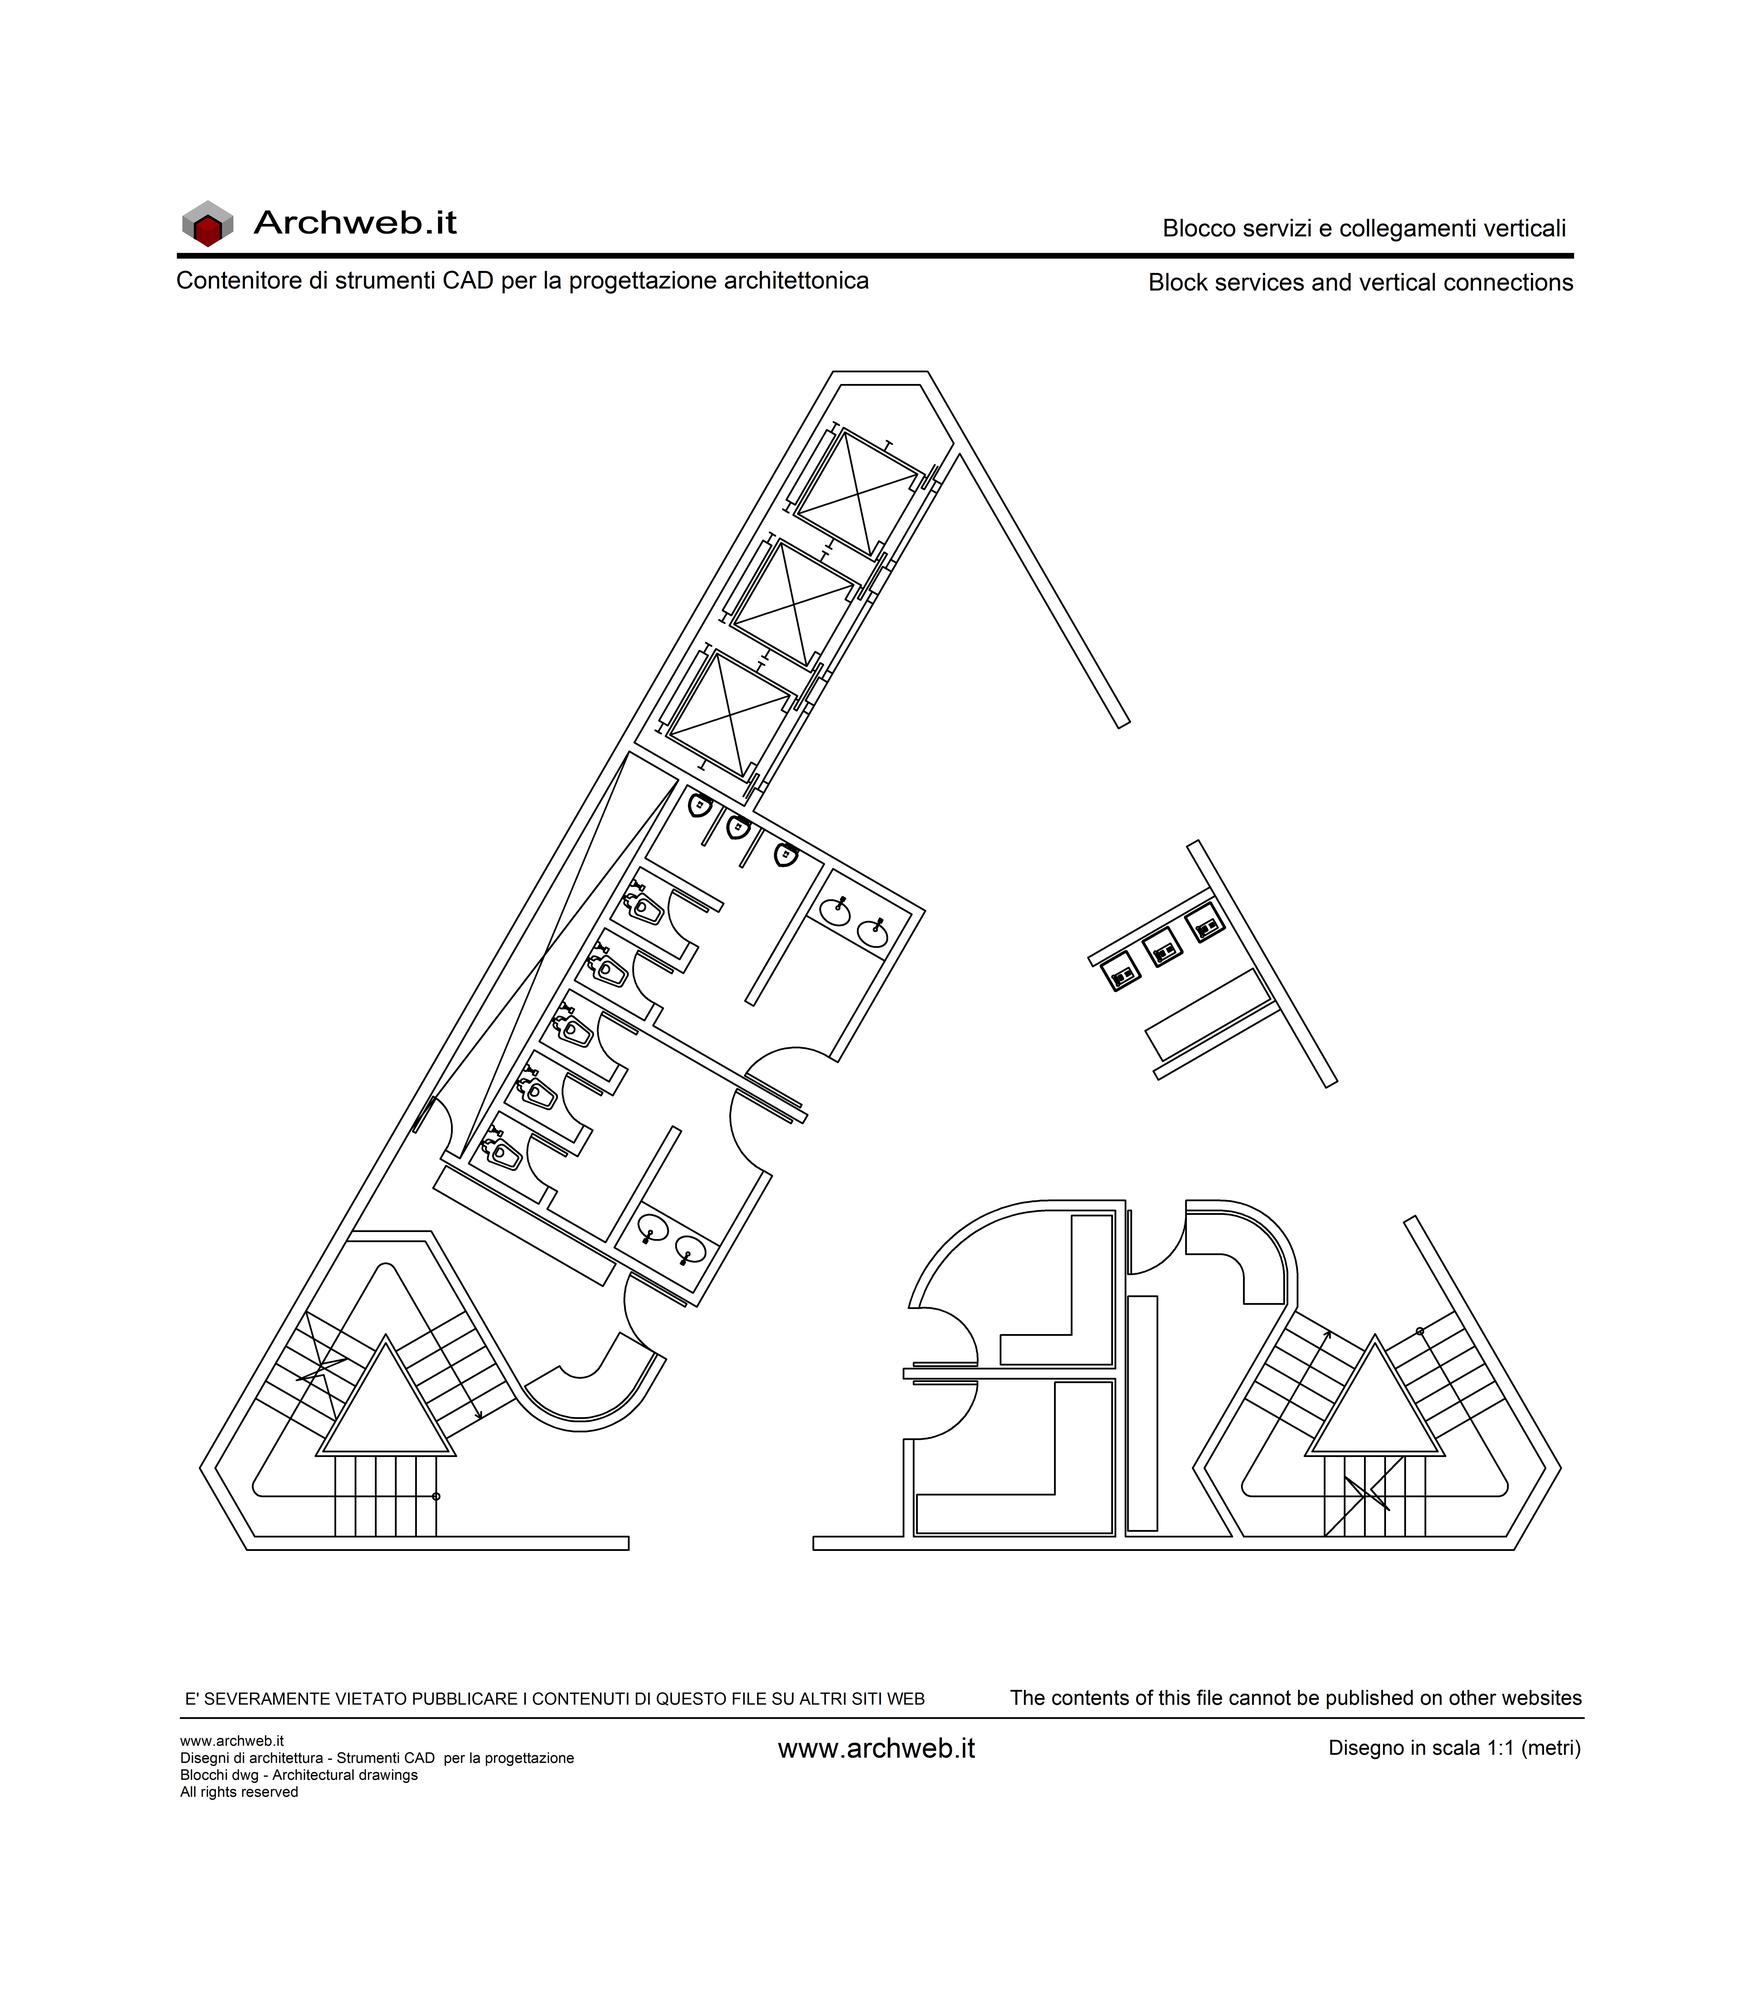 Design of the lifts, stairs and services block